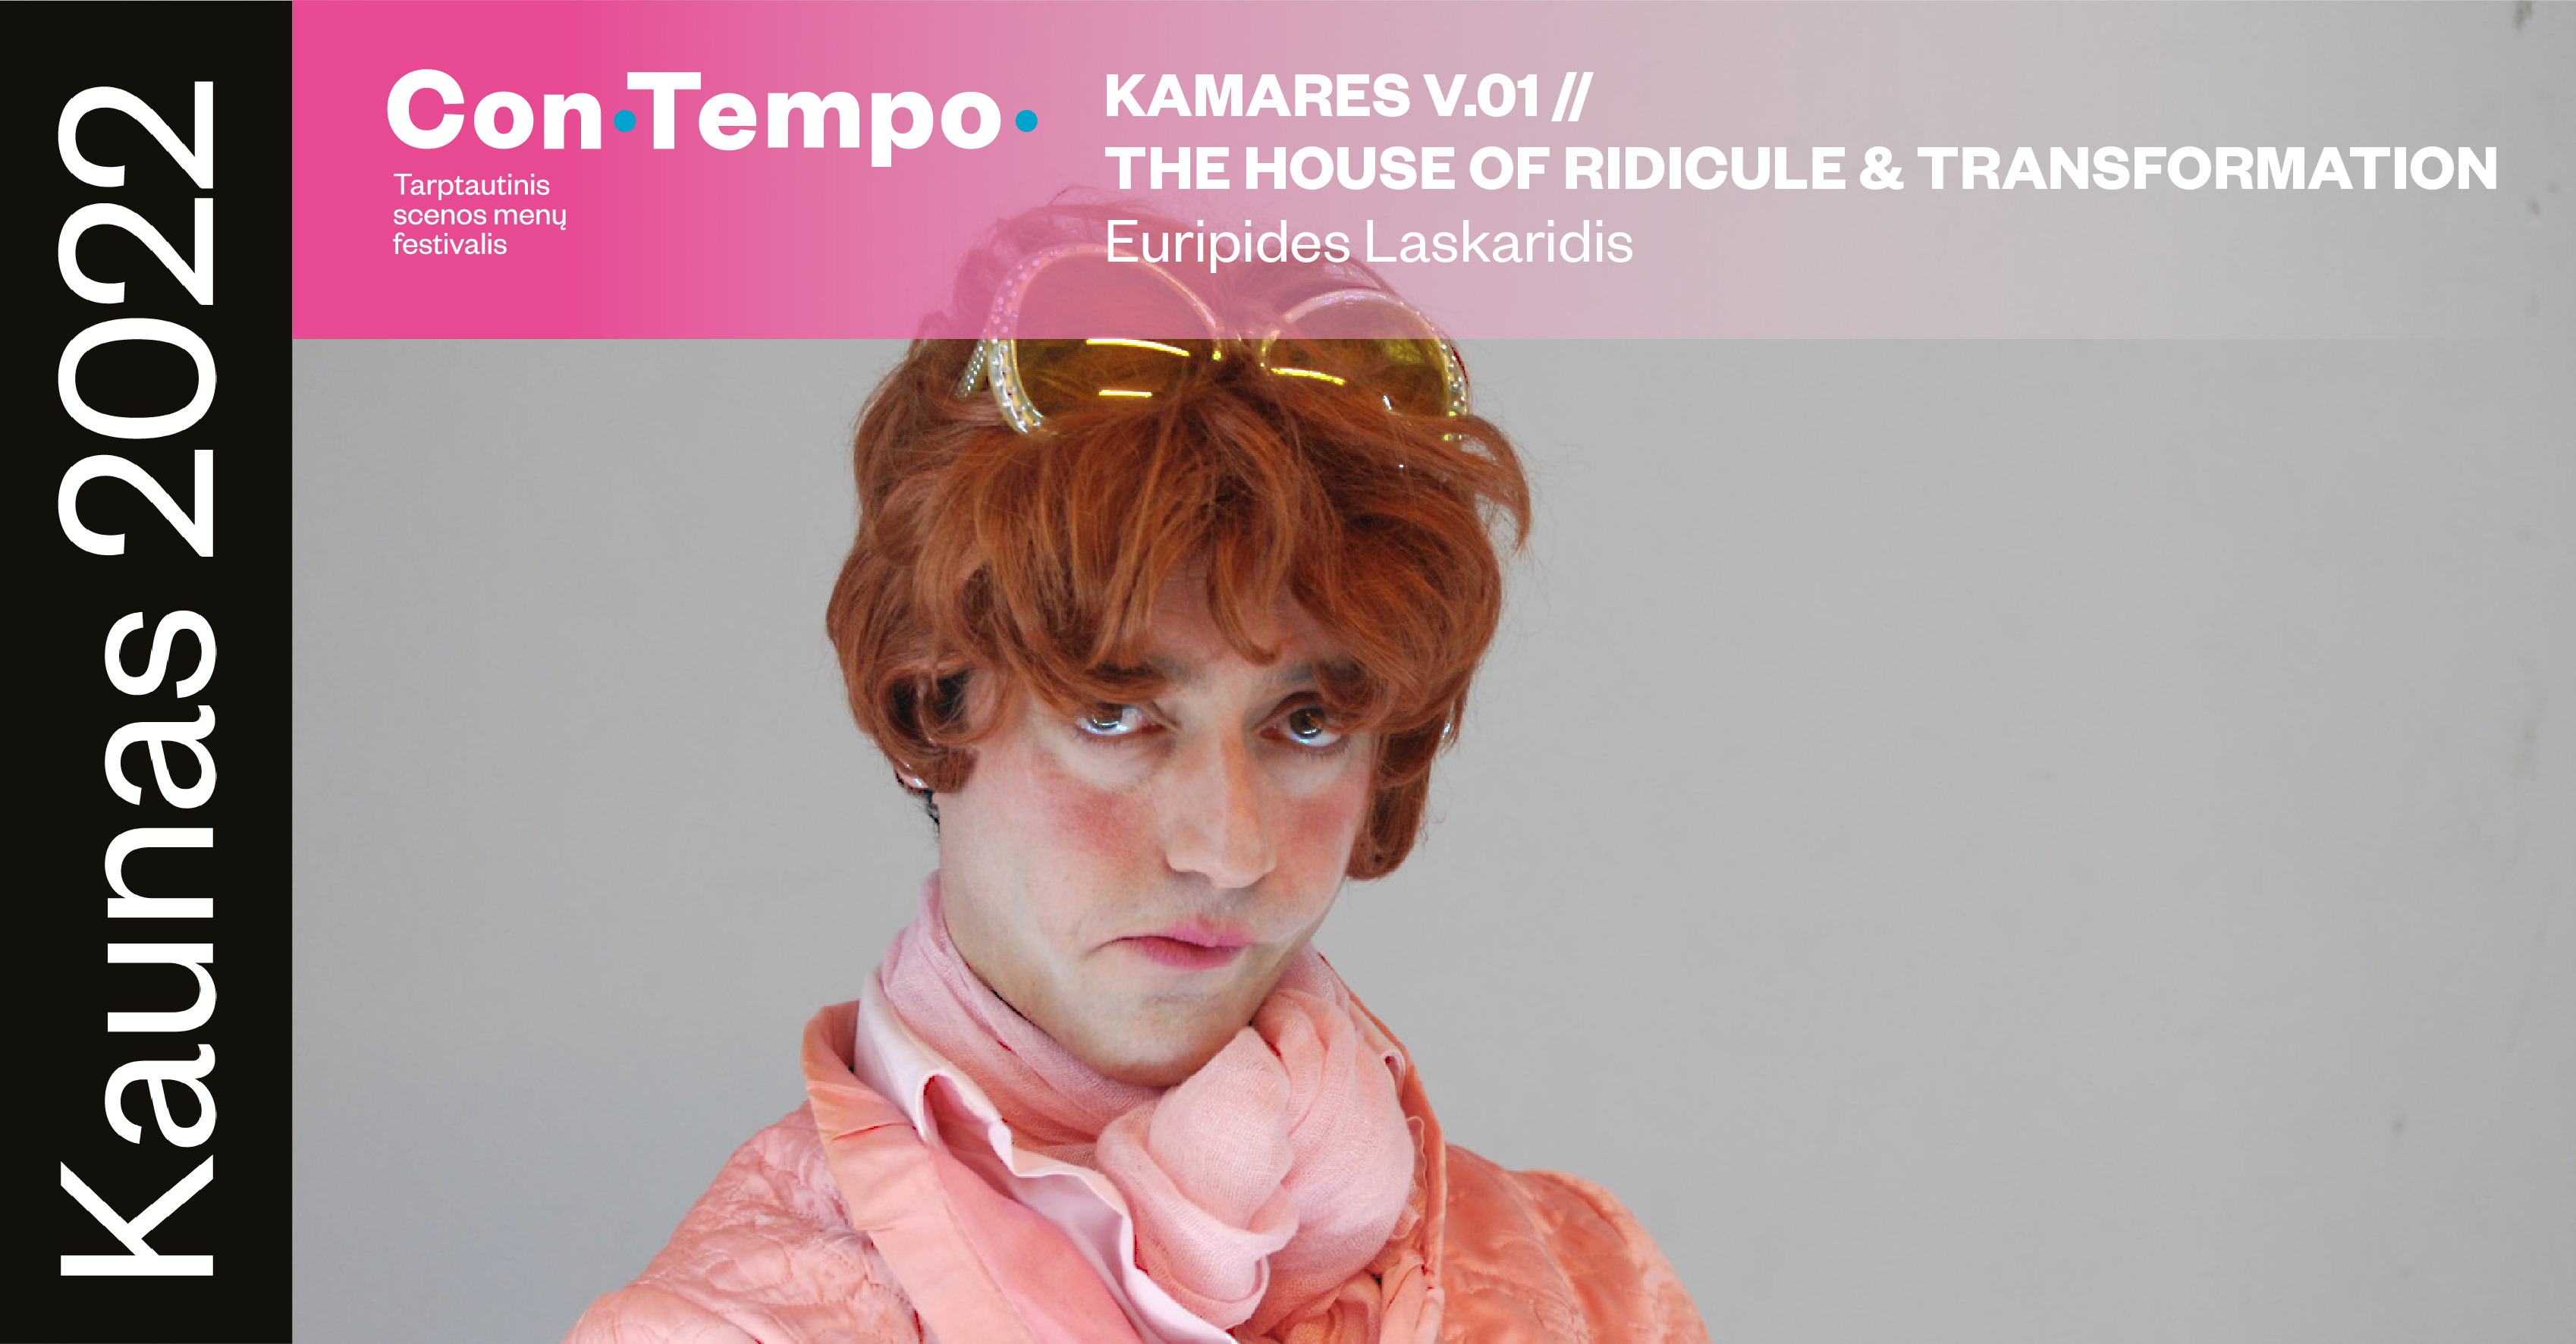 ConTempo 2022: Kamares v.01 // The House of Ridicule & Transformation